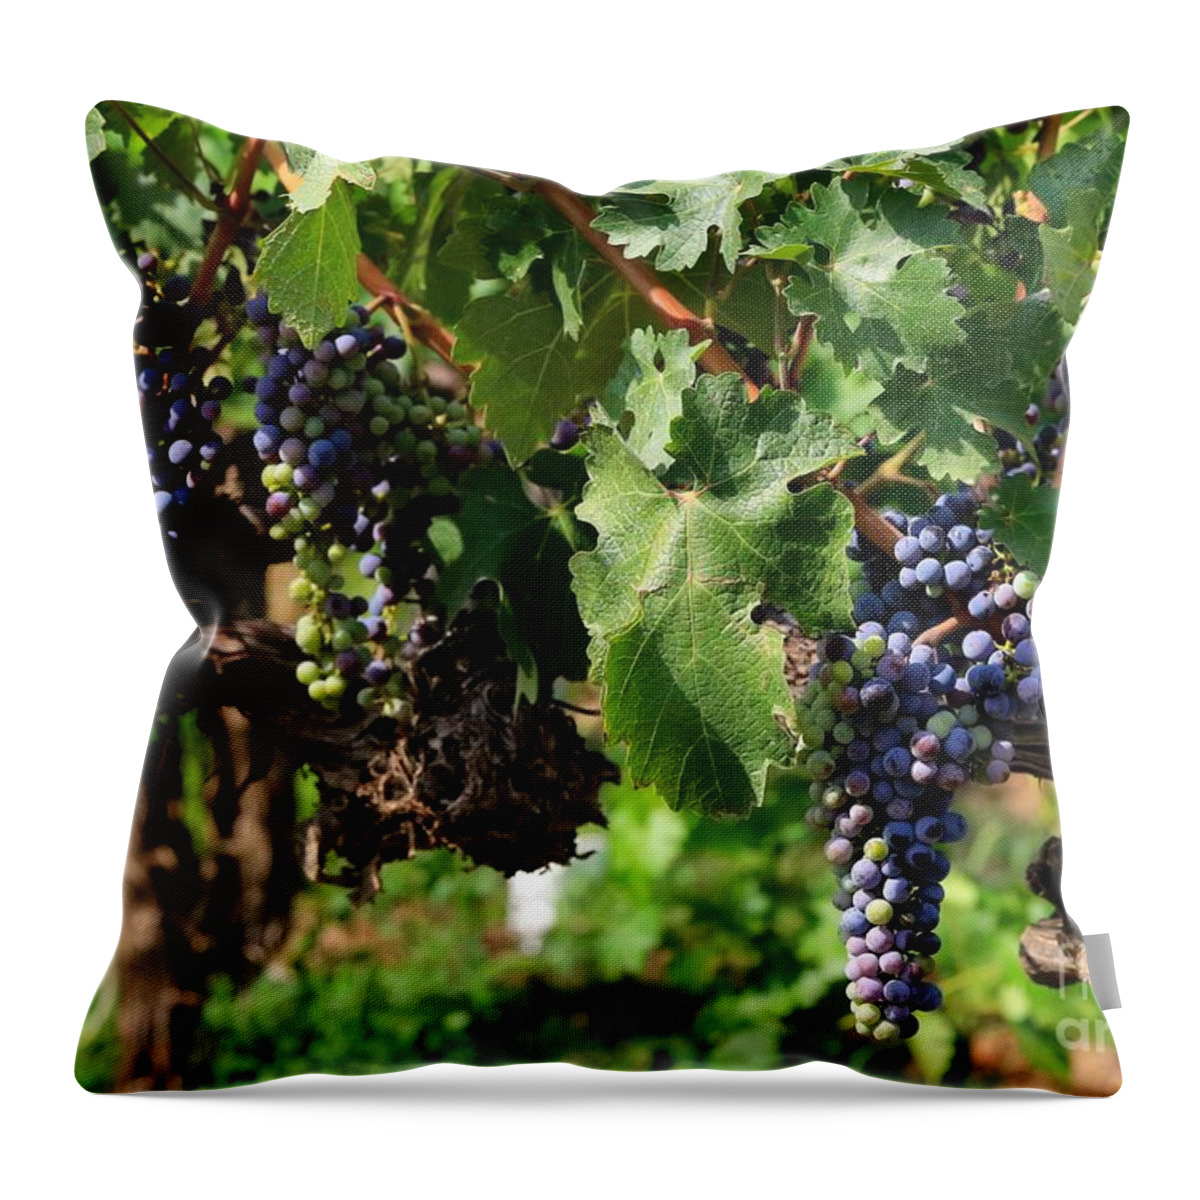 Grapes Throw Pillow featuring the photograph Grape Clusters in Vineyard by Carol Groenen